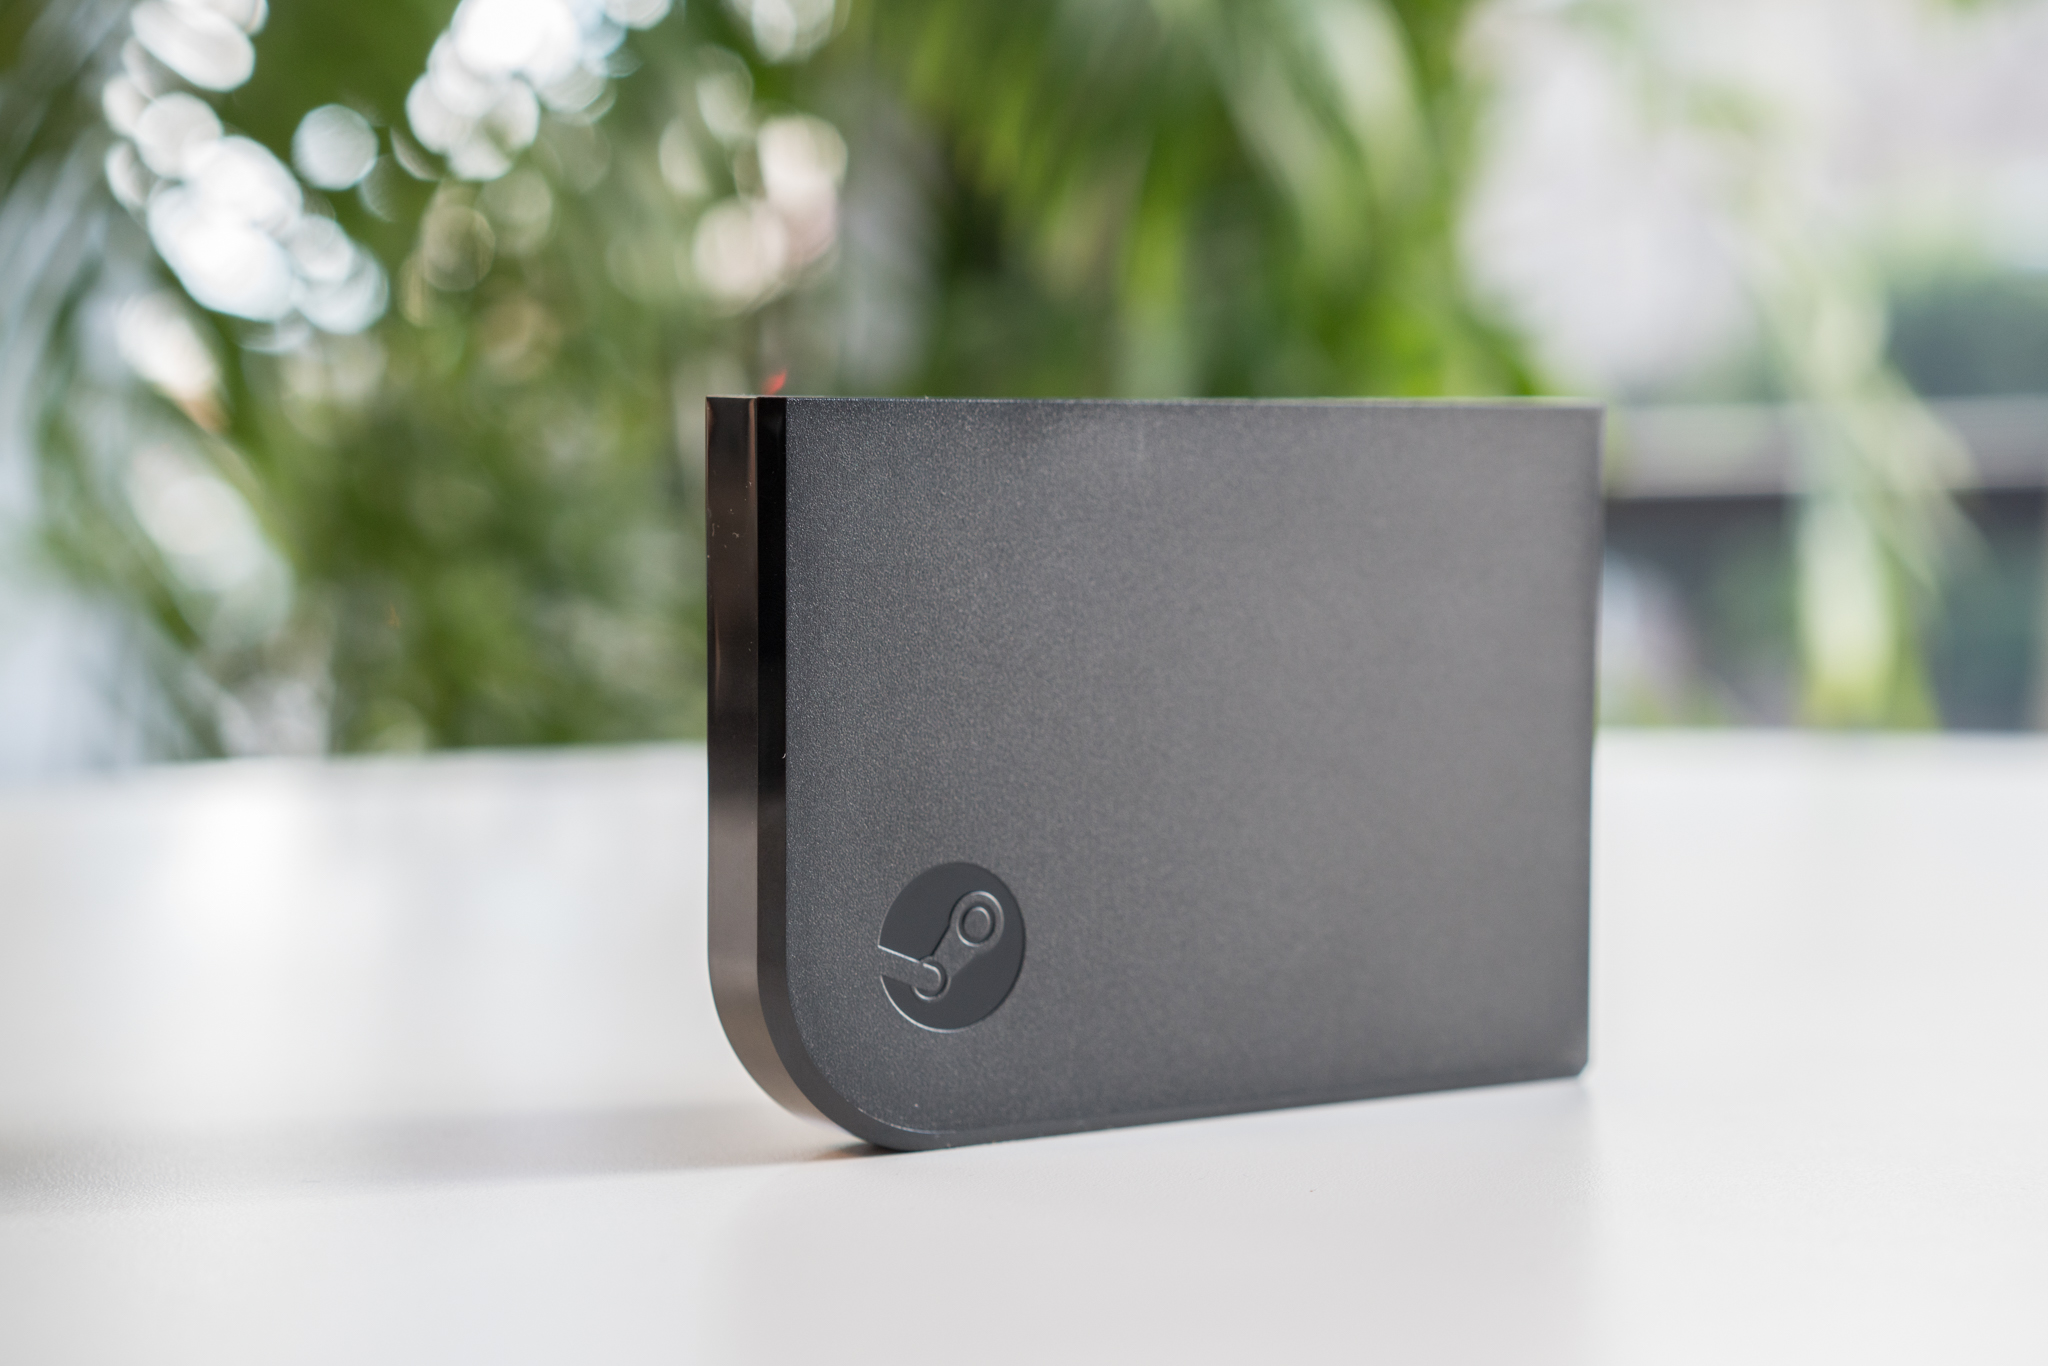 Steam Link review: Four reasons to buy a Steam Link -- and two reasons to think twice - CNET